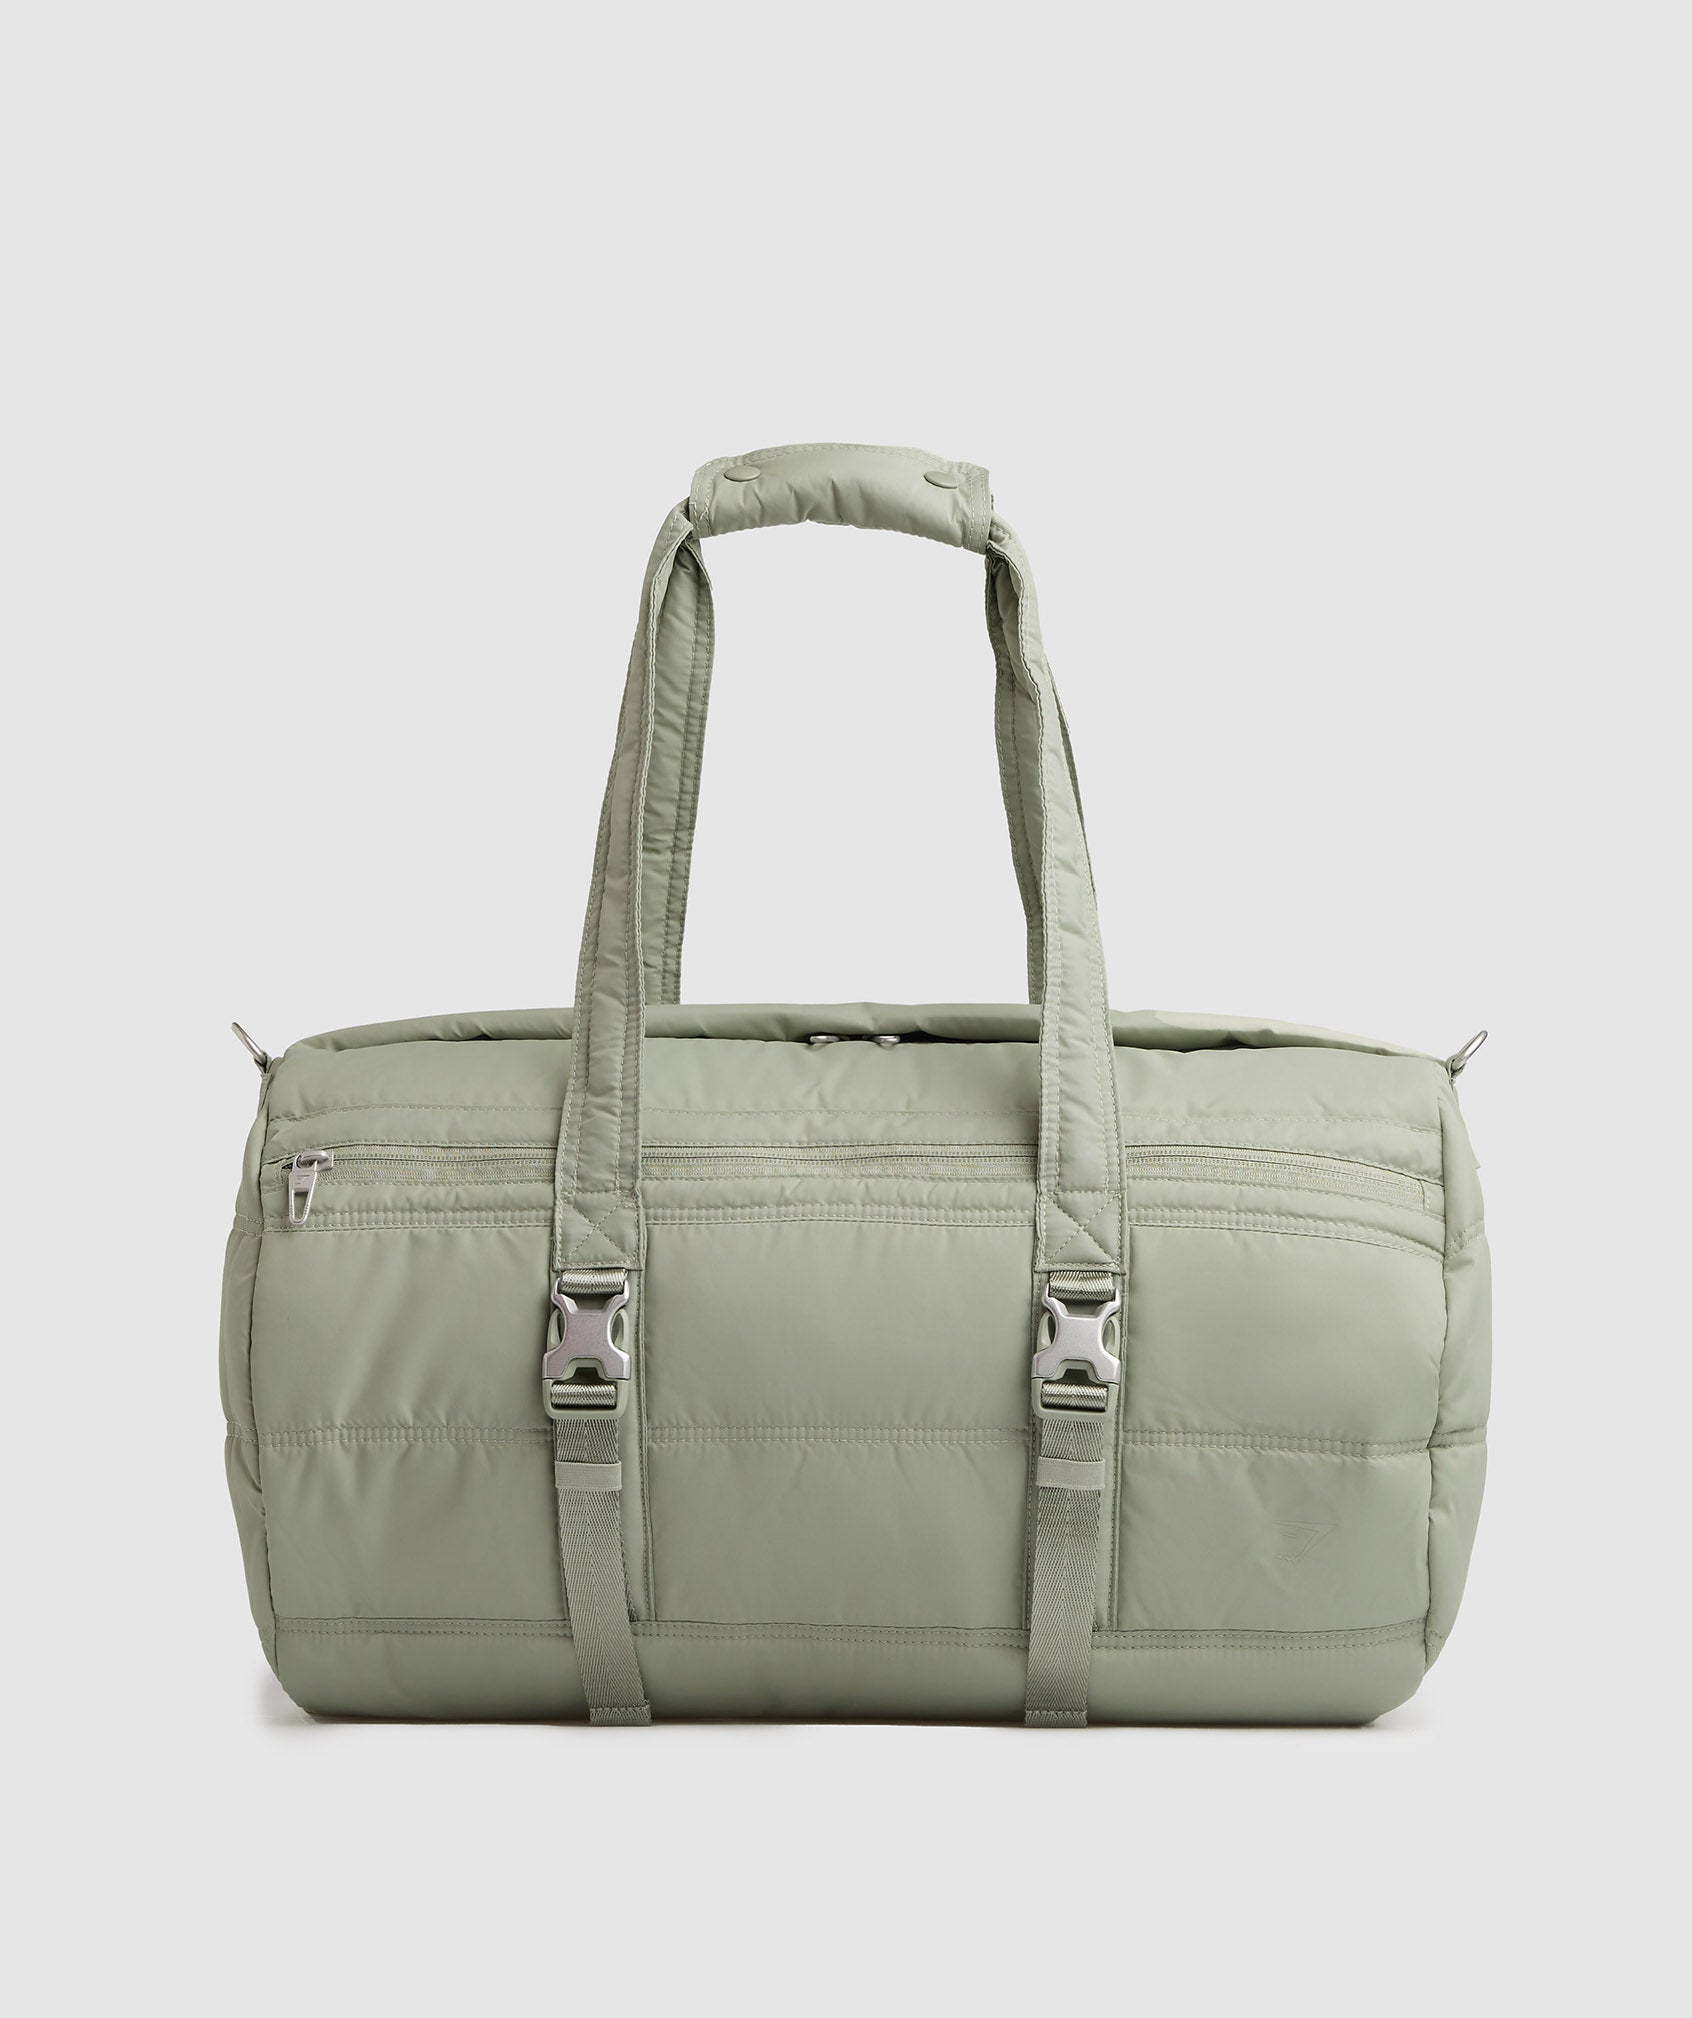 Premium Lifestyle Barrel Bag in Light Olive Green - view 1